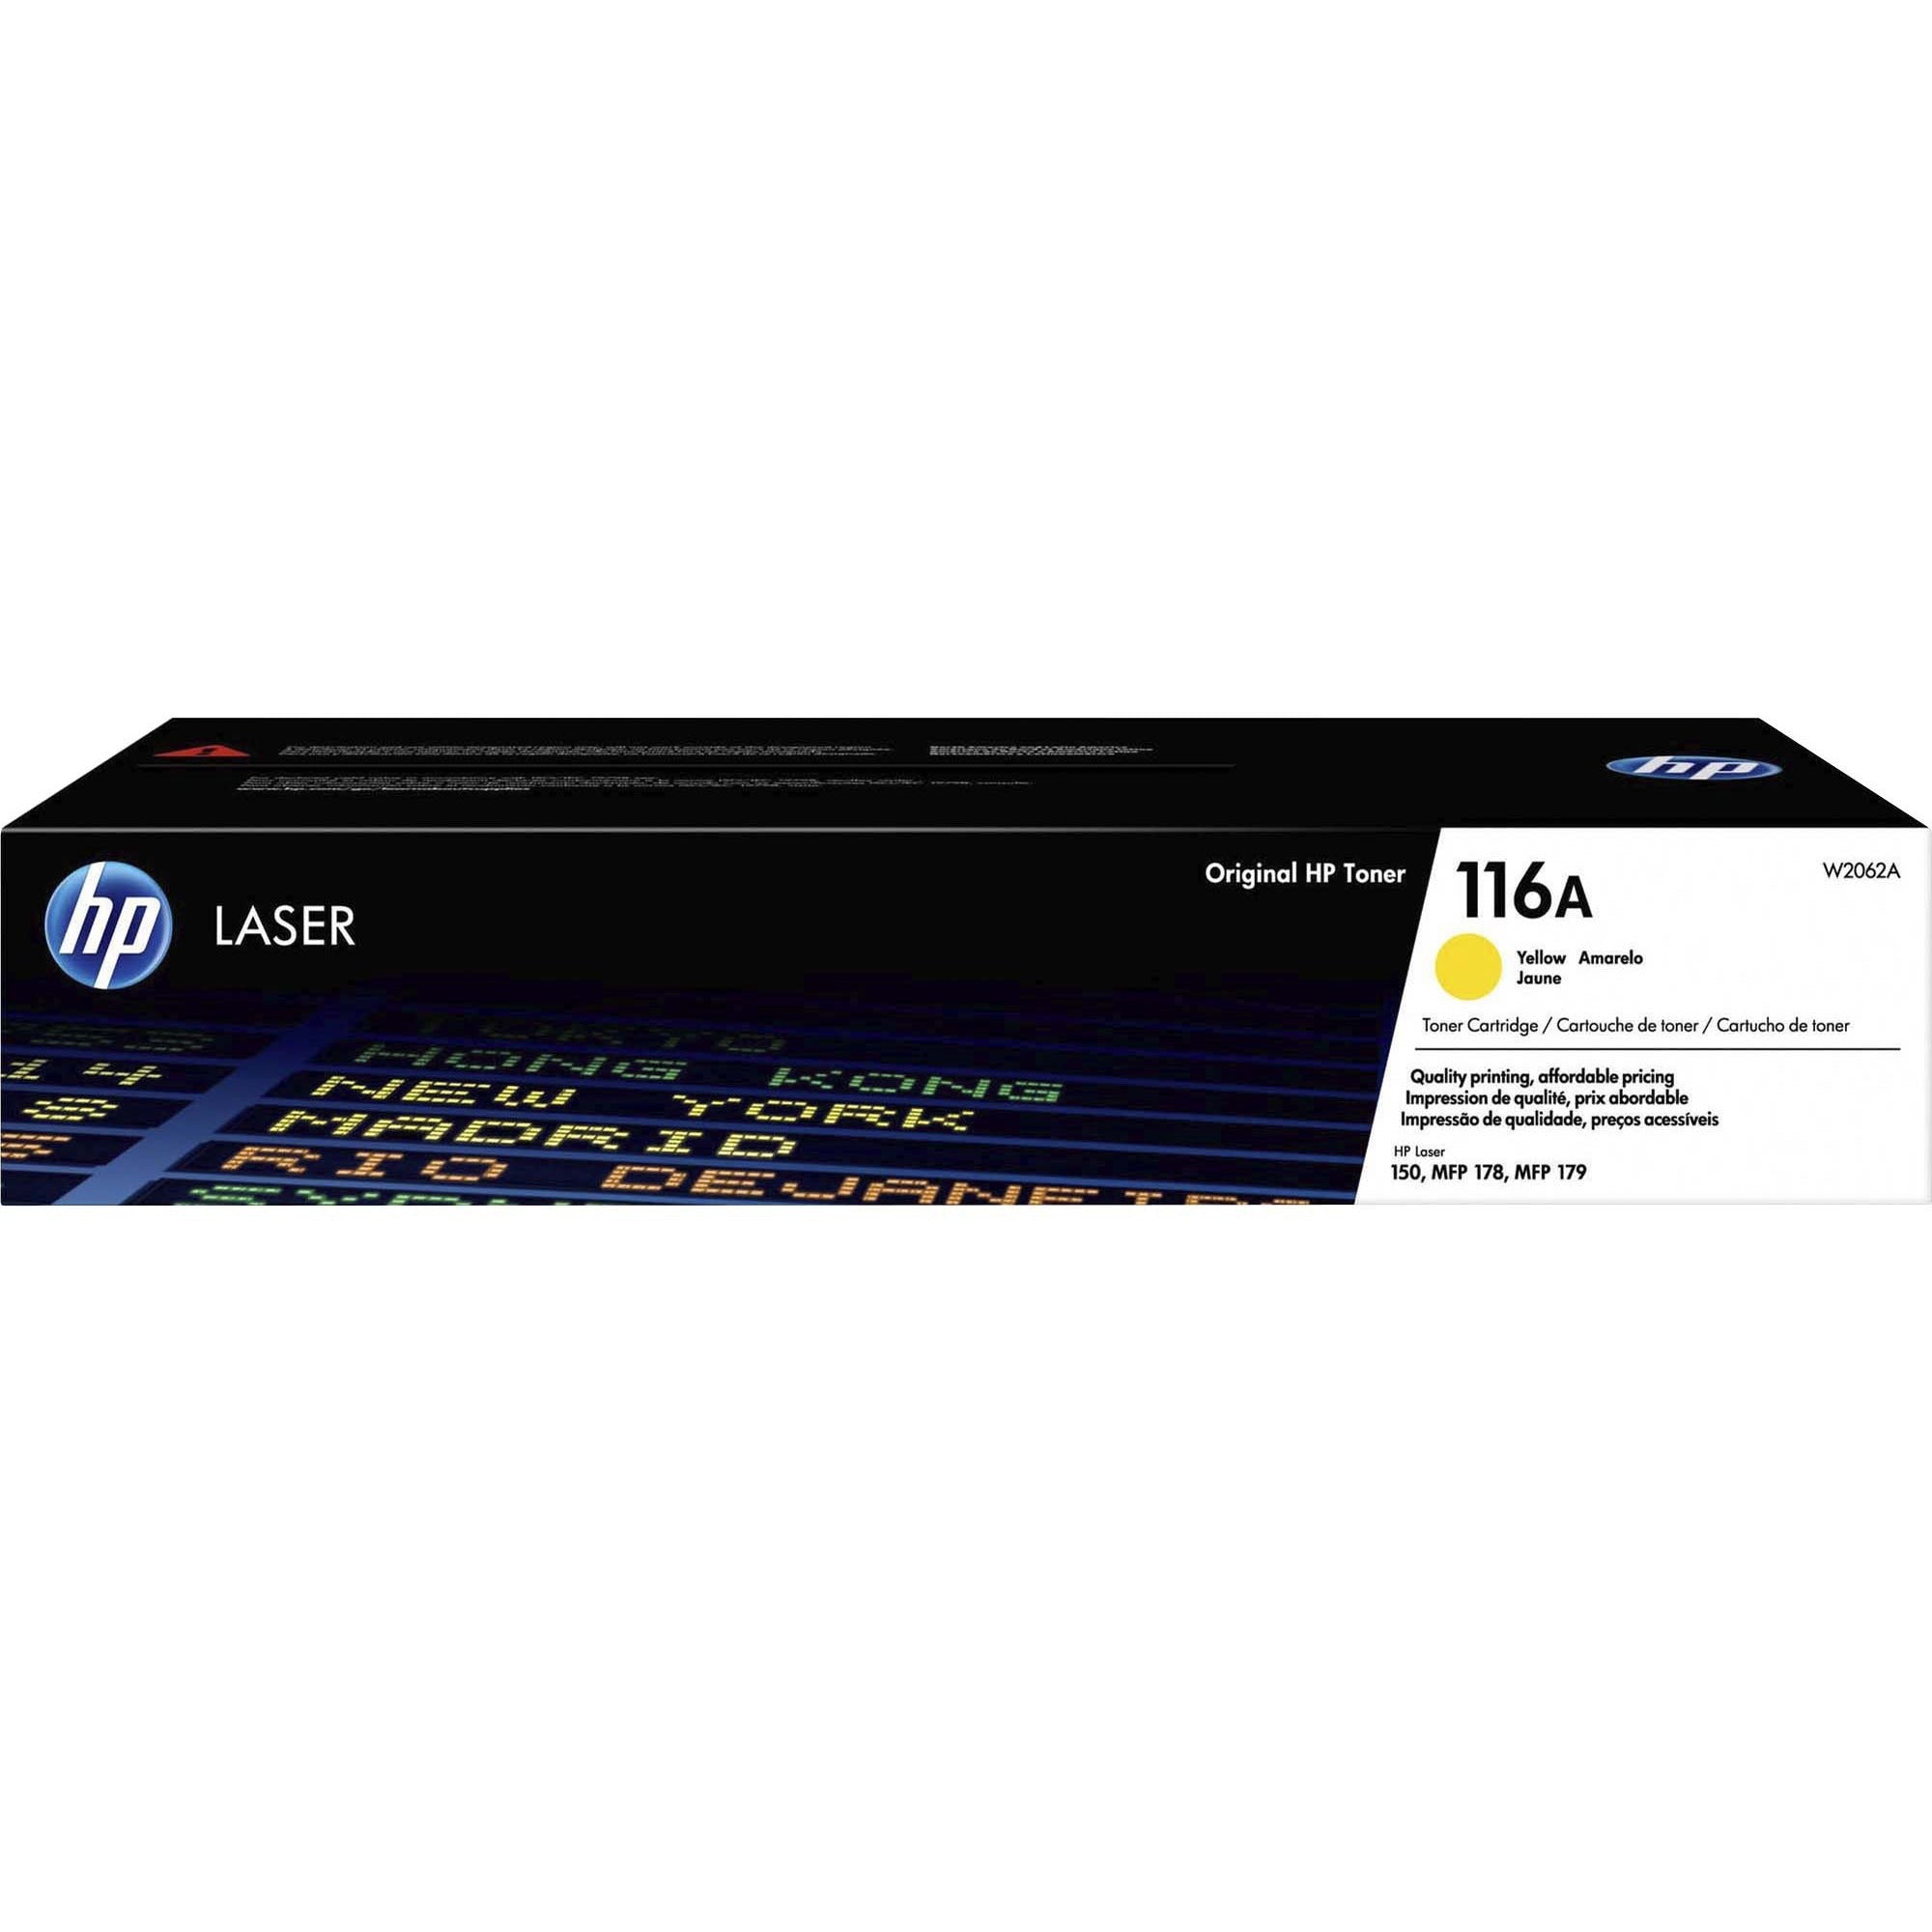 hp-116a-w2062a-original-laser-toner-cartridge-yellow-1-each-700-pages_heww2062a - 1